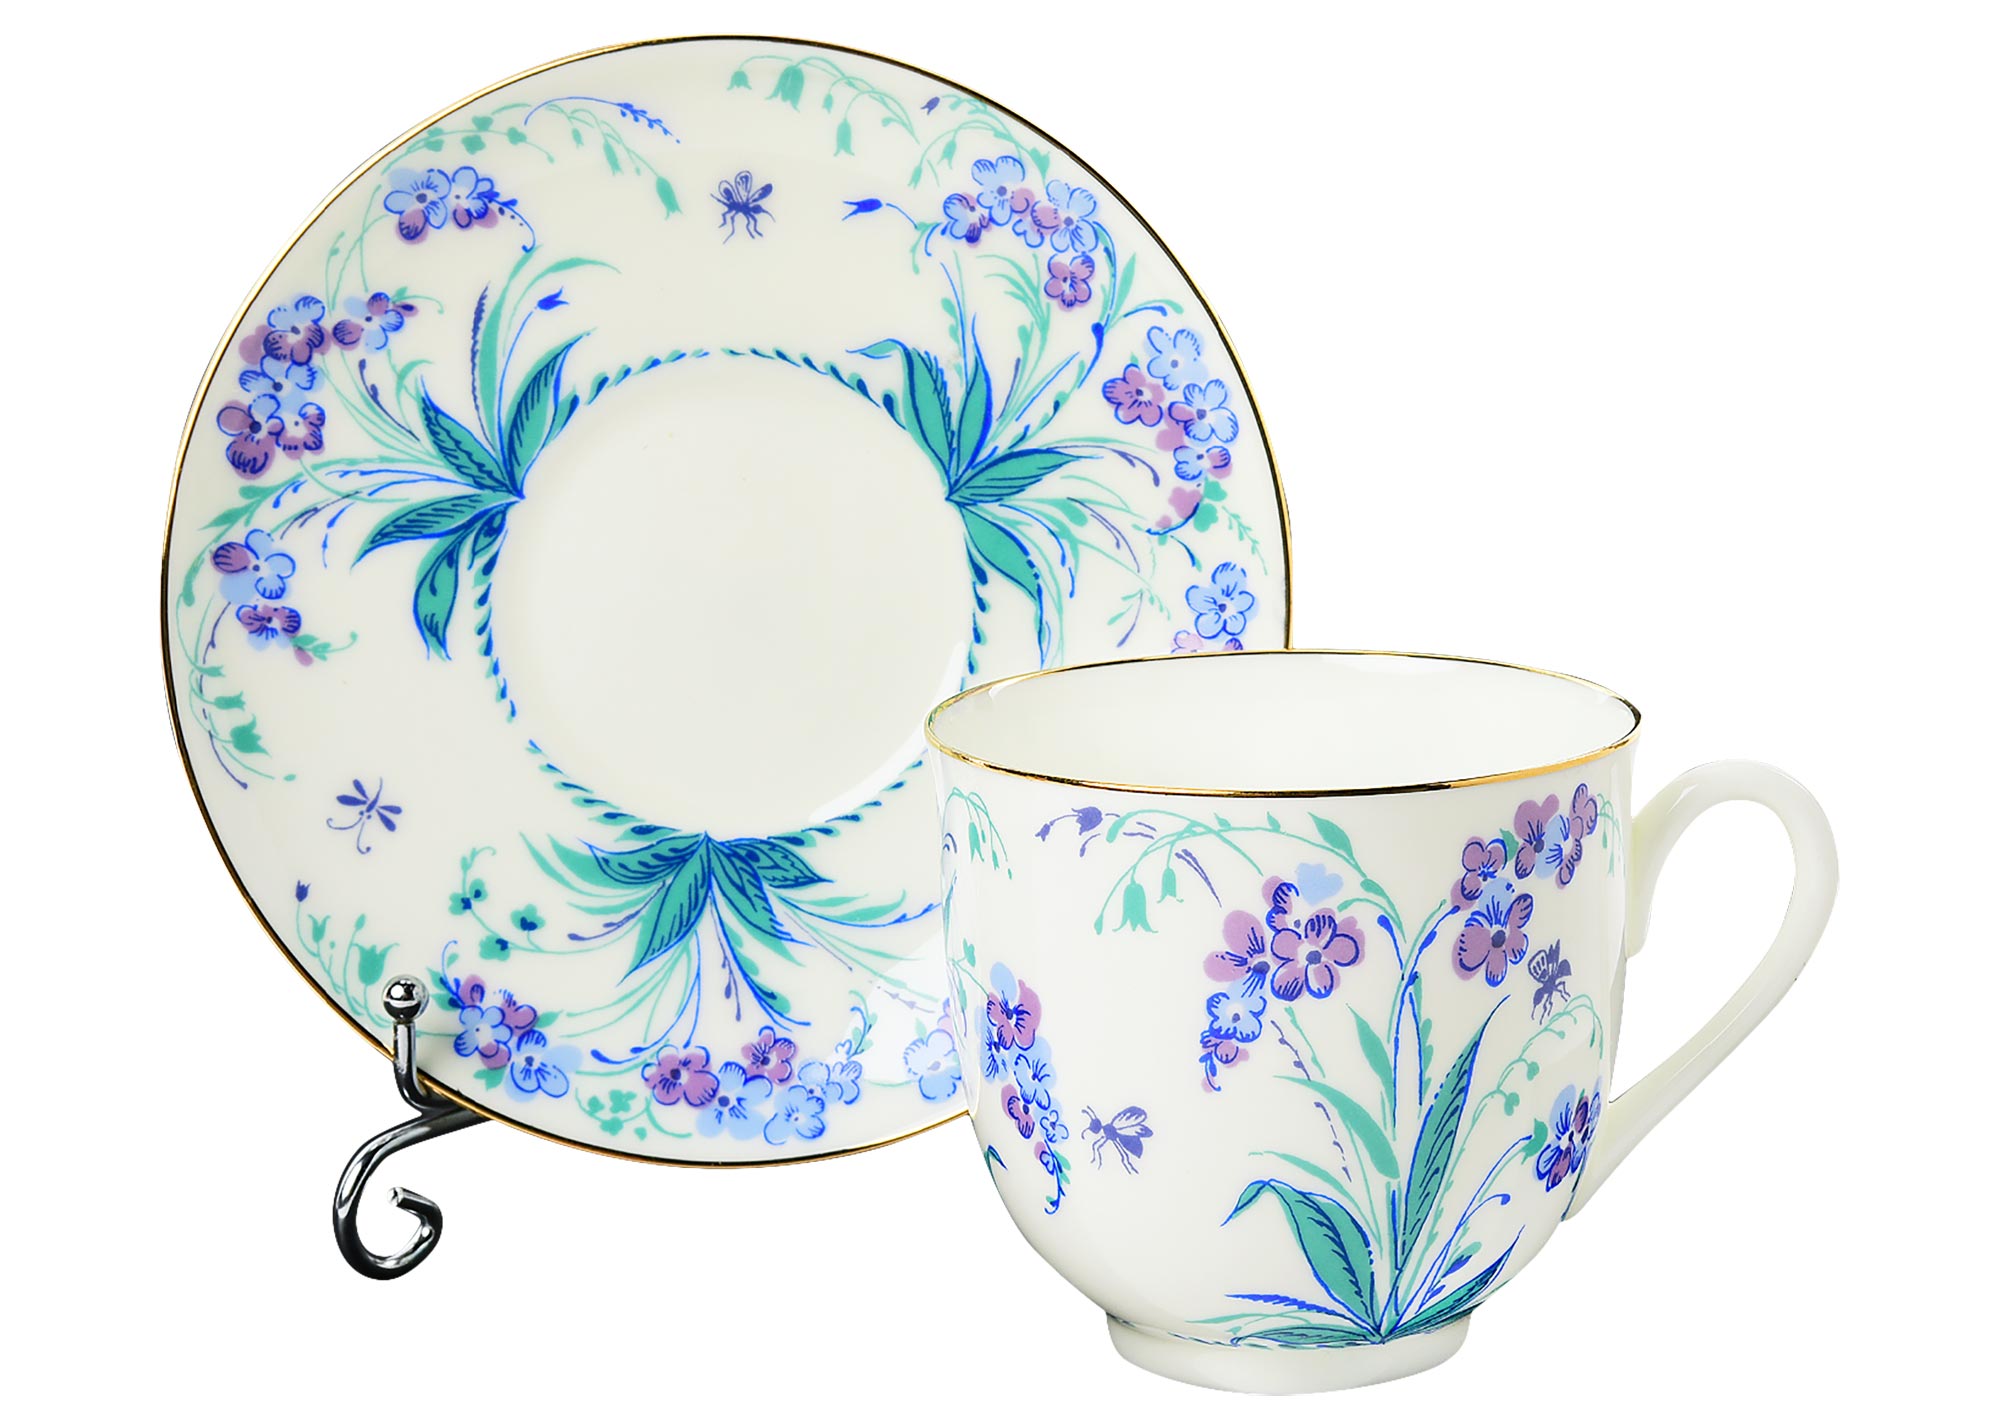 Buy Forget-Me-Not Bone China Coffee Cup and Saucer at GoldenCockerel.com